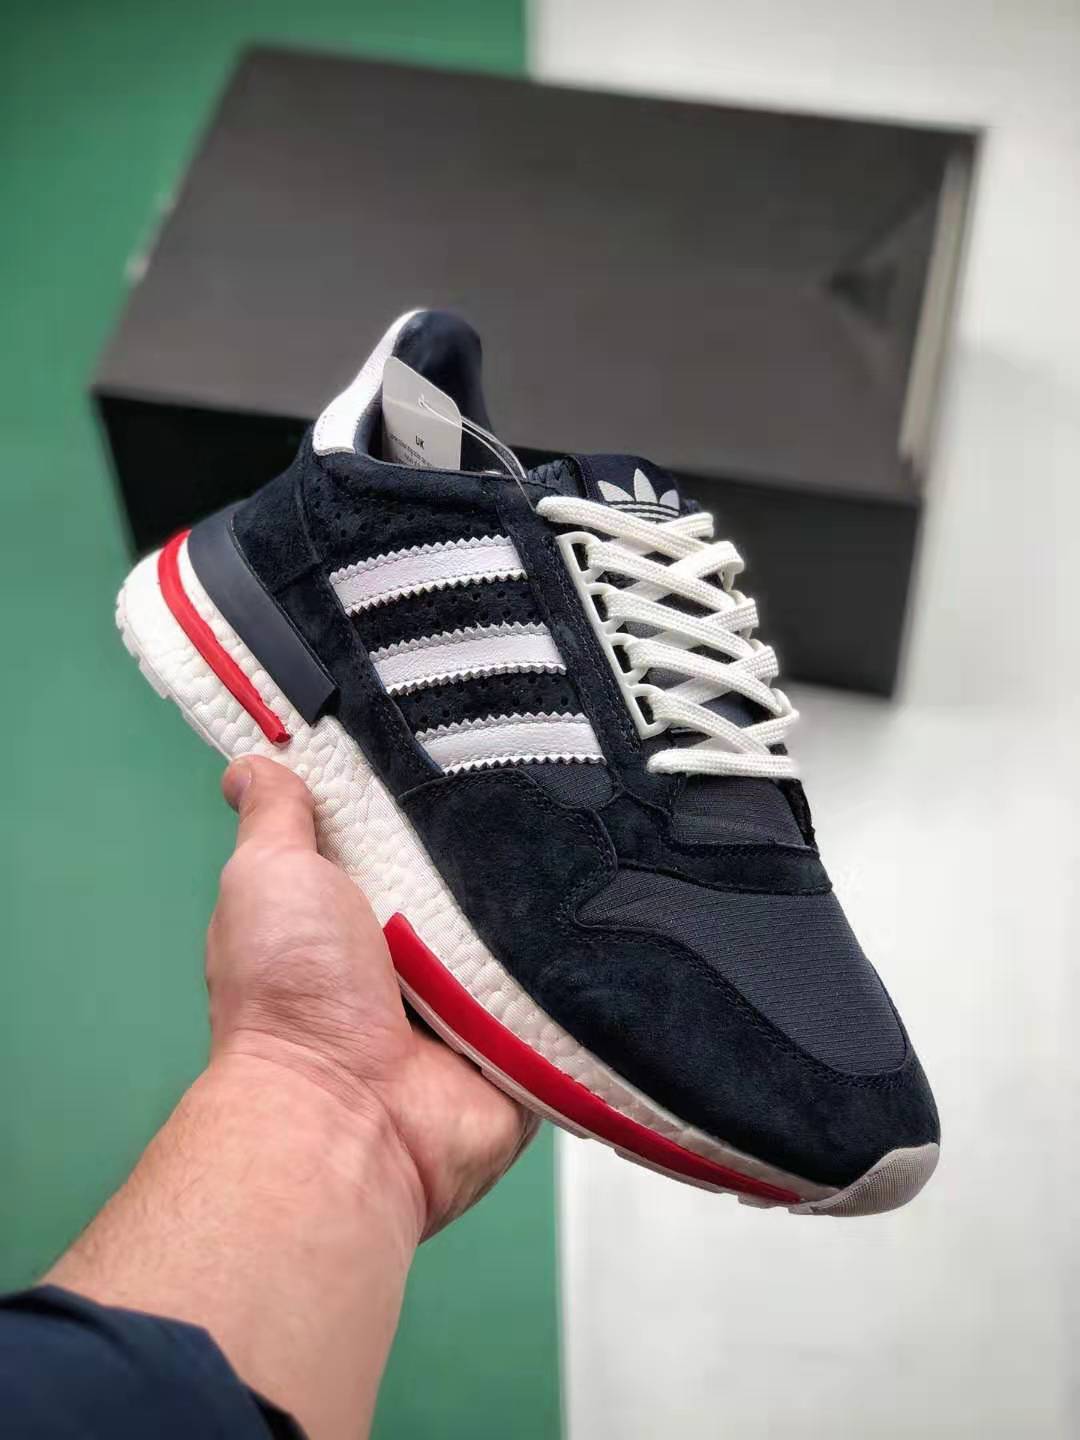 Shop Adidas Clover ZX 500 Cloud White Blue Red Shoes BB6843 Online